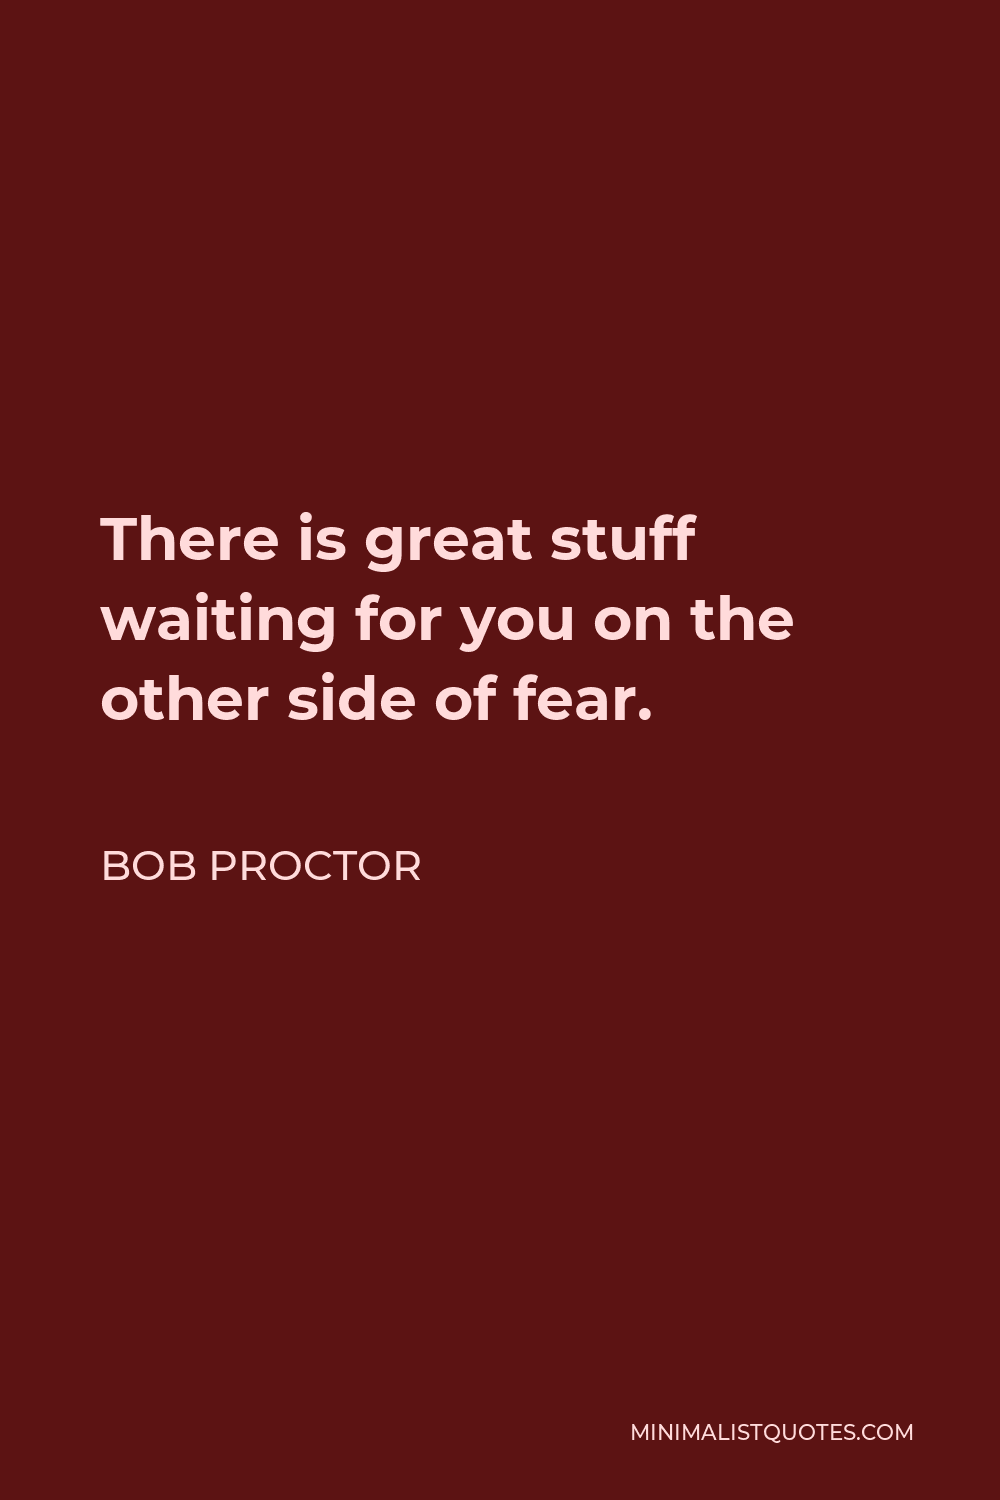 Bob Proctor Quote - There is great stuff waiting for you on the other side of fear.